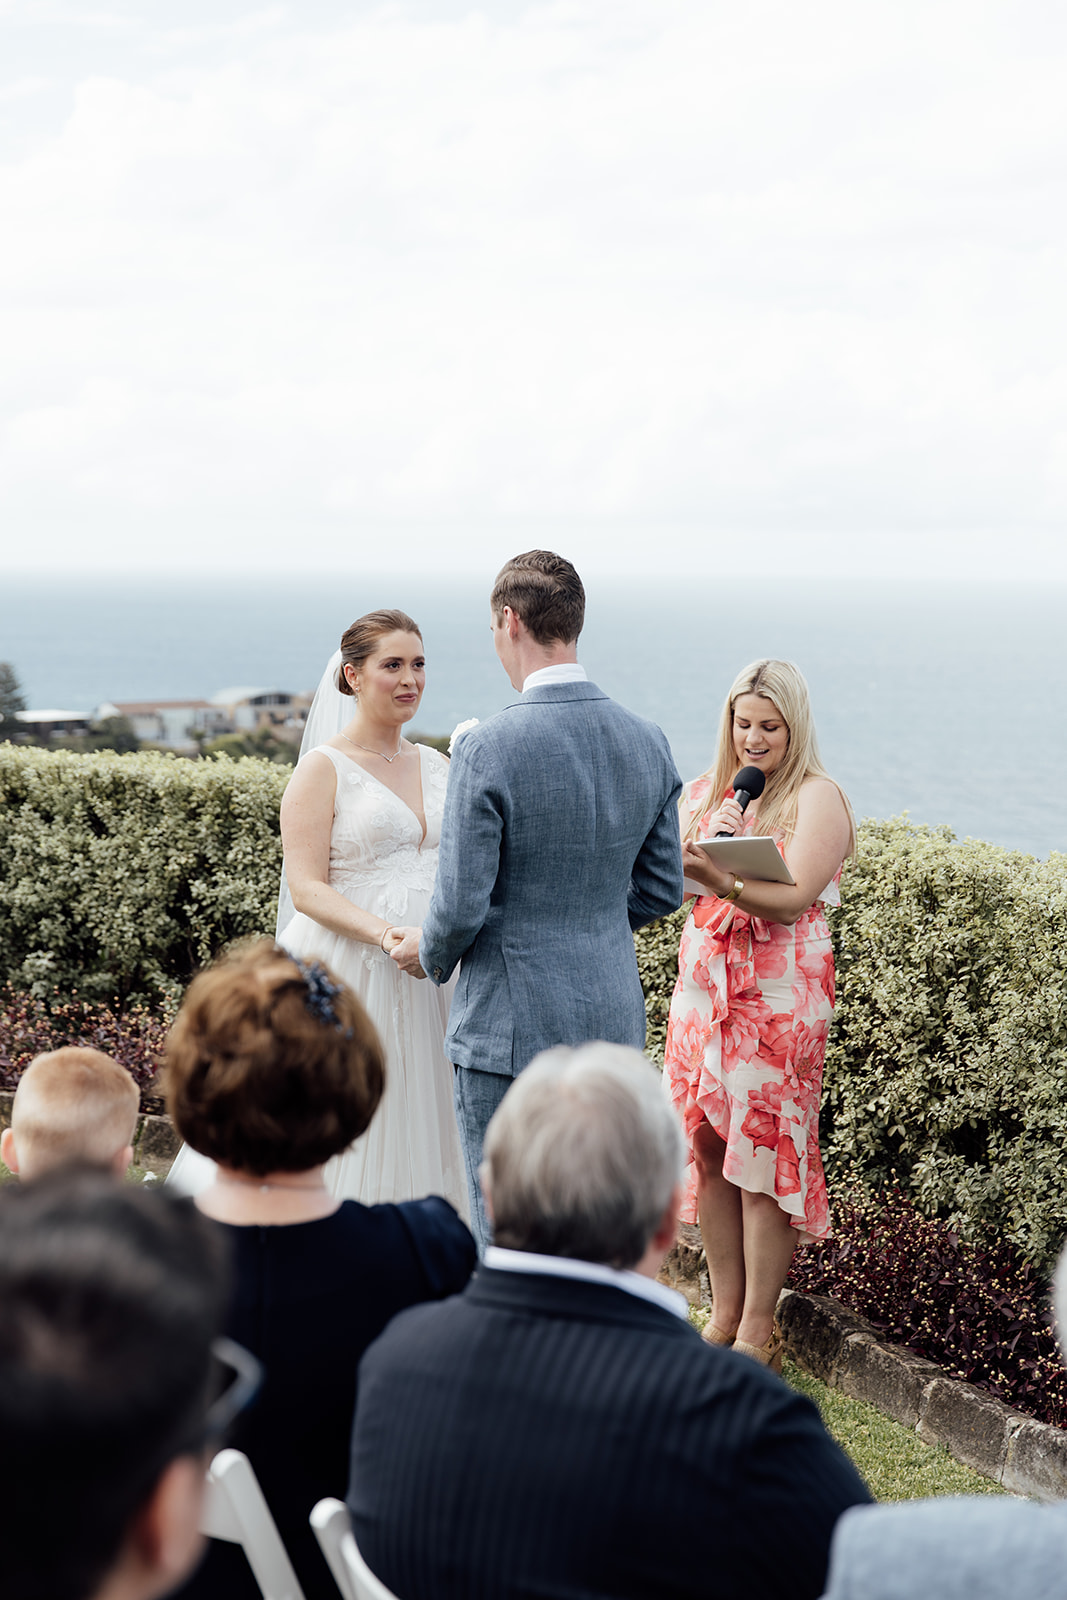 A wedding ceremony at Jonah's whale beach